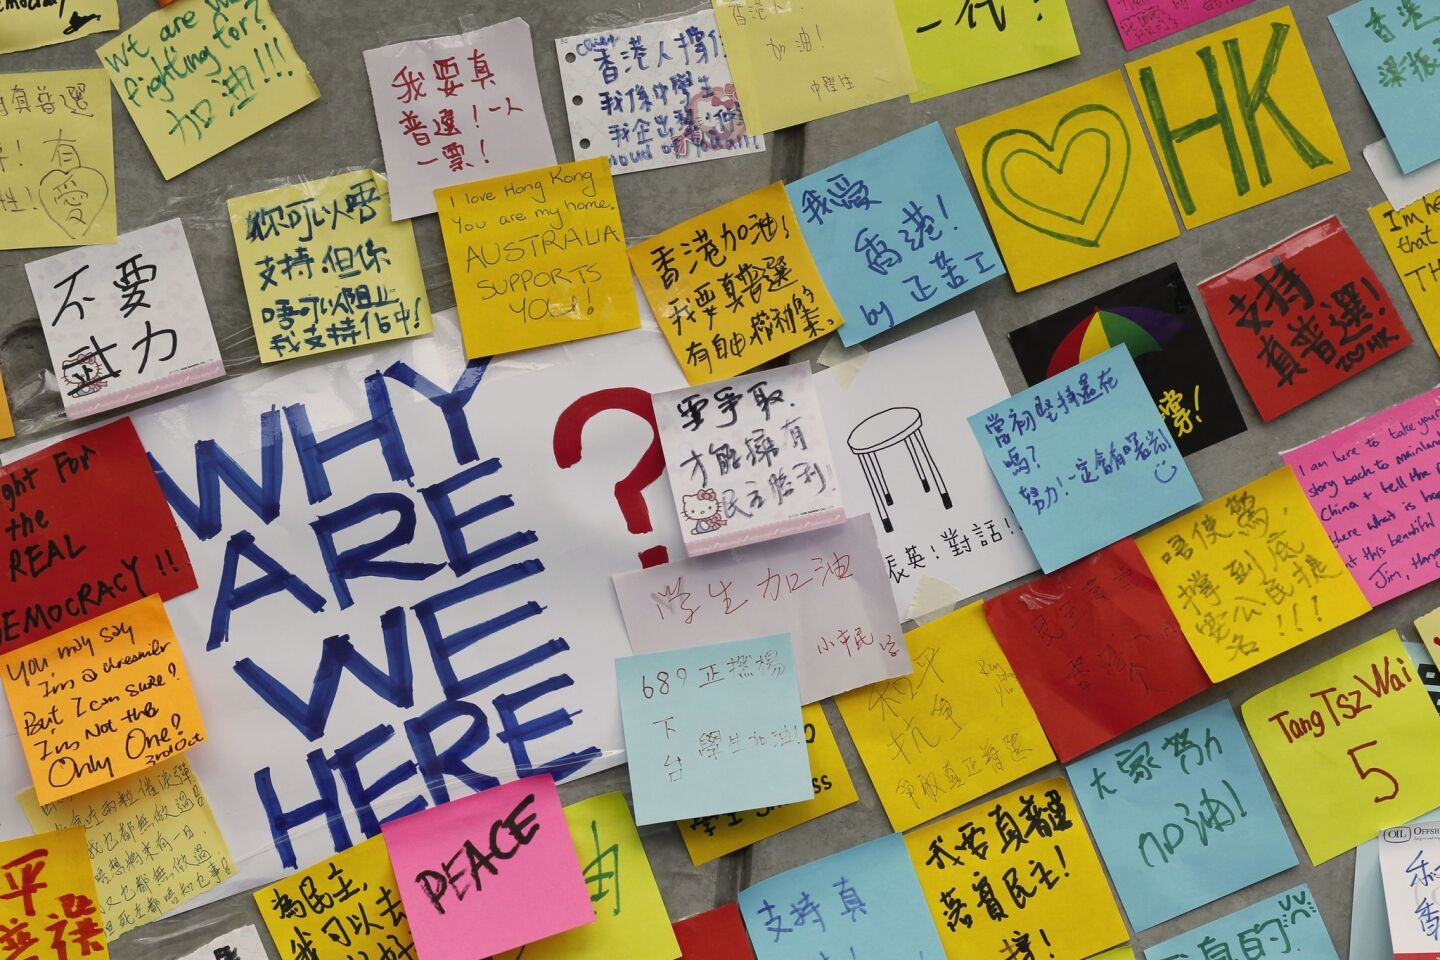 Notes of support are posted on the wall of an encampment of pro-democracy student protesters outside the government complex in Hong Kong.